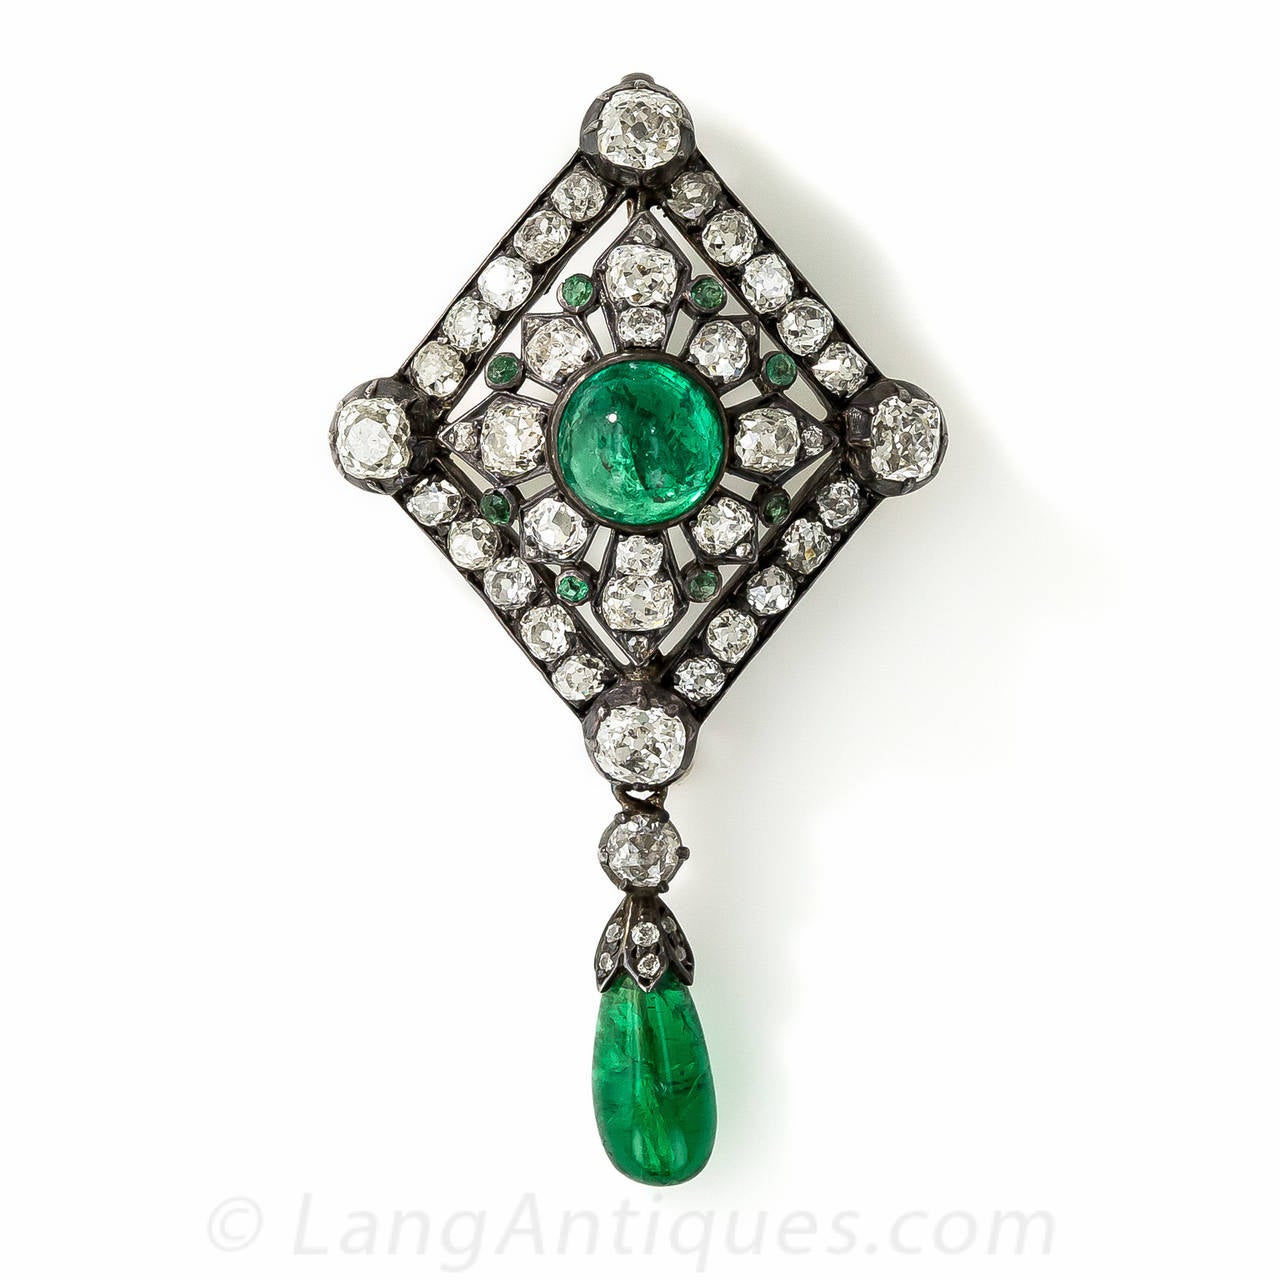 A truly exquisite gem dating from the mid-19th century, this original Victorian pin and pendant features two gorgeous green emeralds, together totaling over 8 carats, and 5.50 carats of bright white and lively old mine-cut diamonds. The central